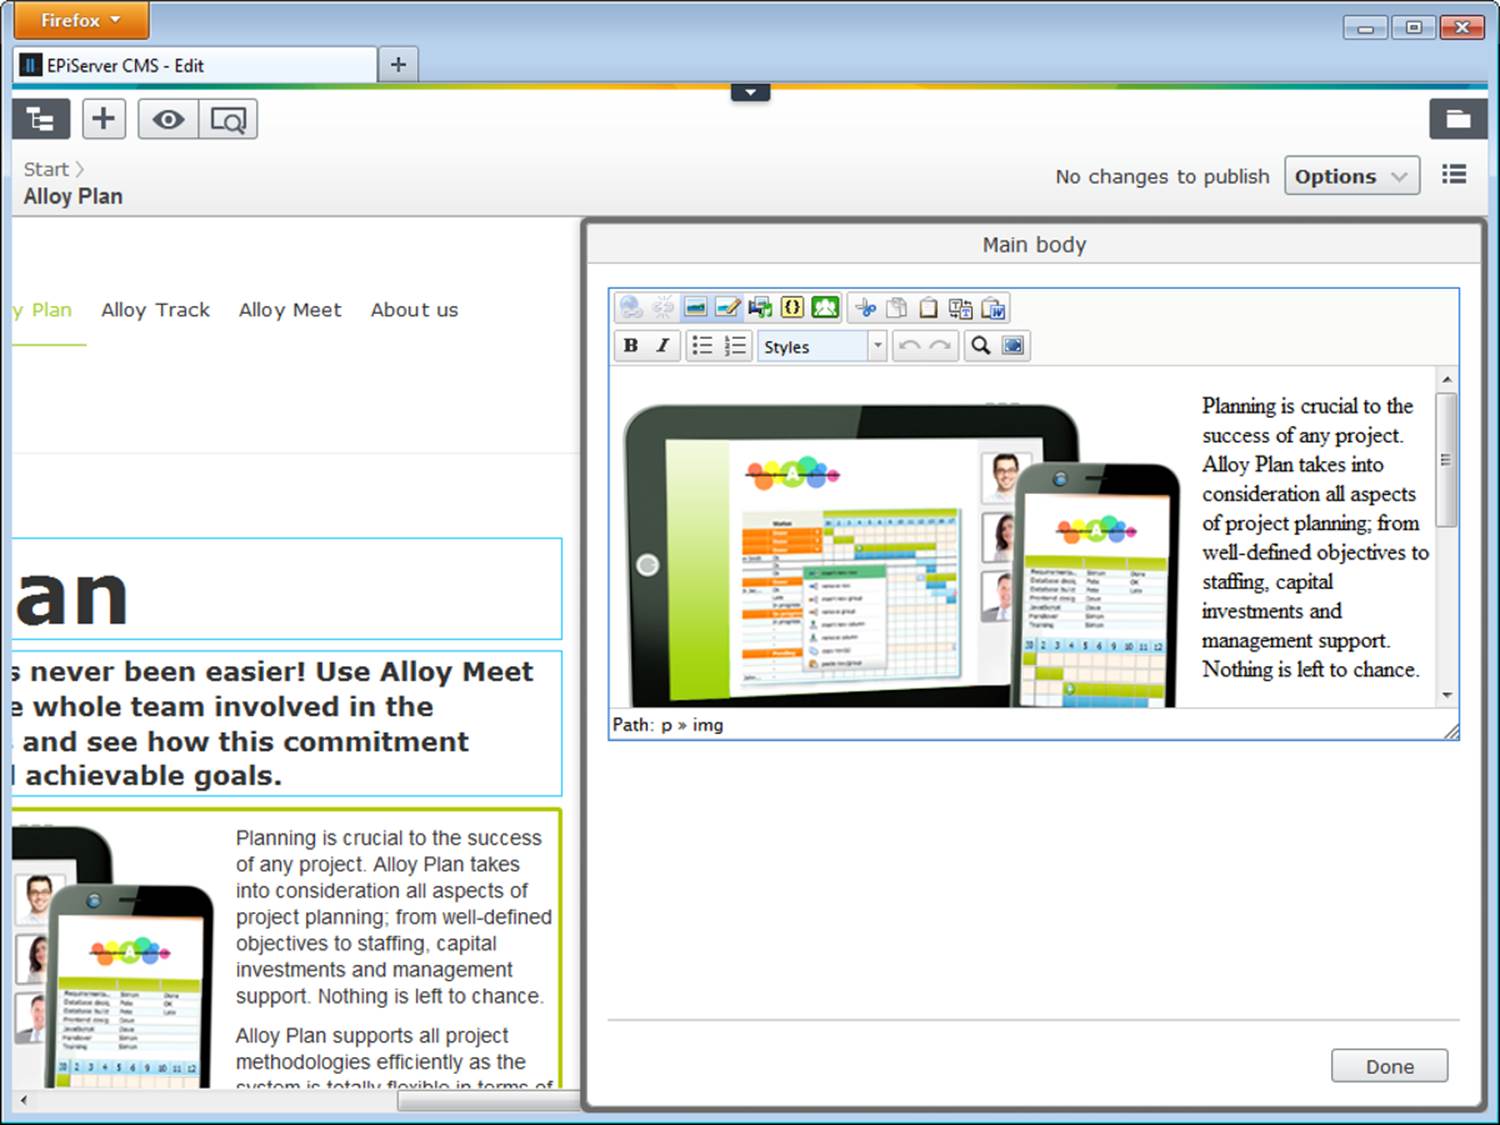 Editing the main content of the page using a WYSIWYG editor (TinyMCE) in which editors can use HTML elements.